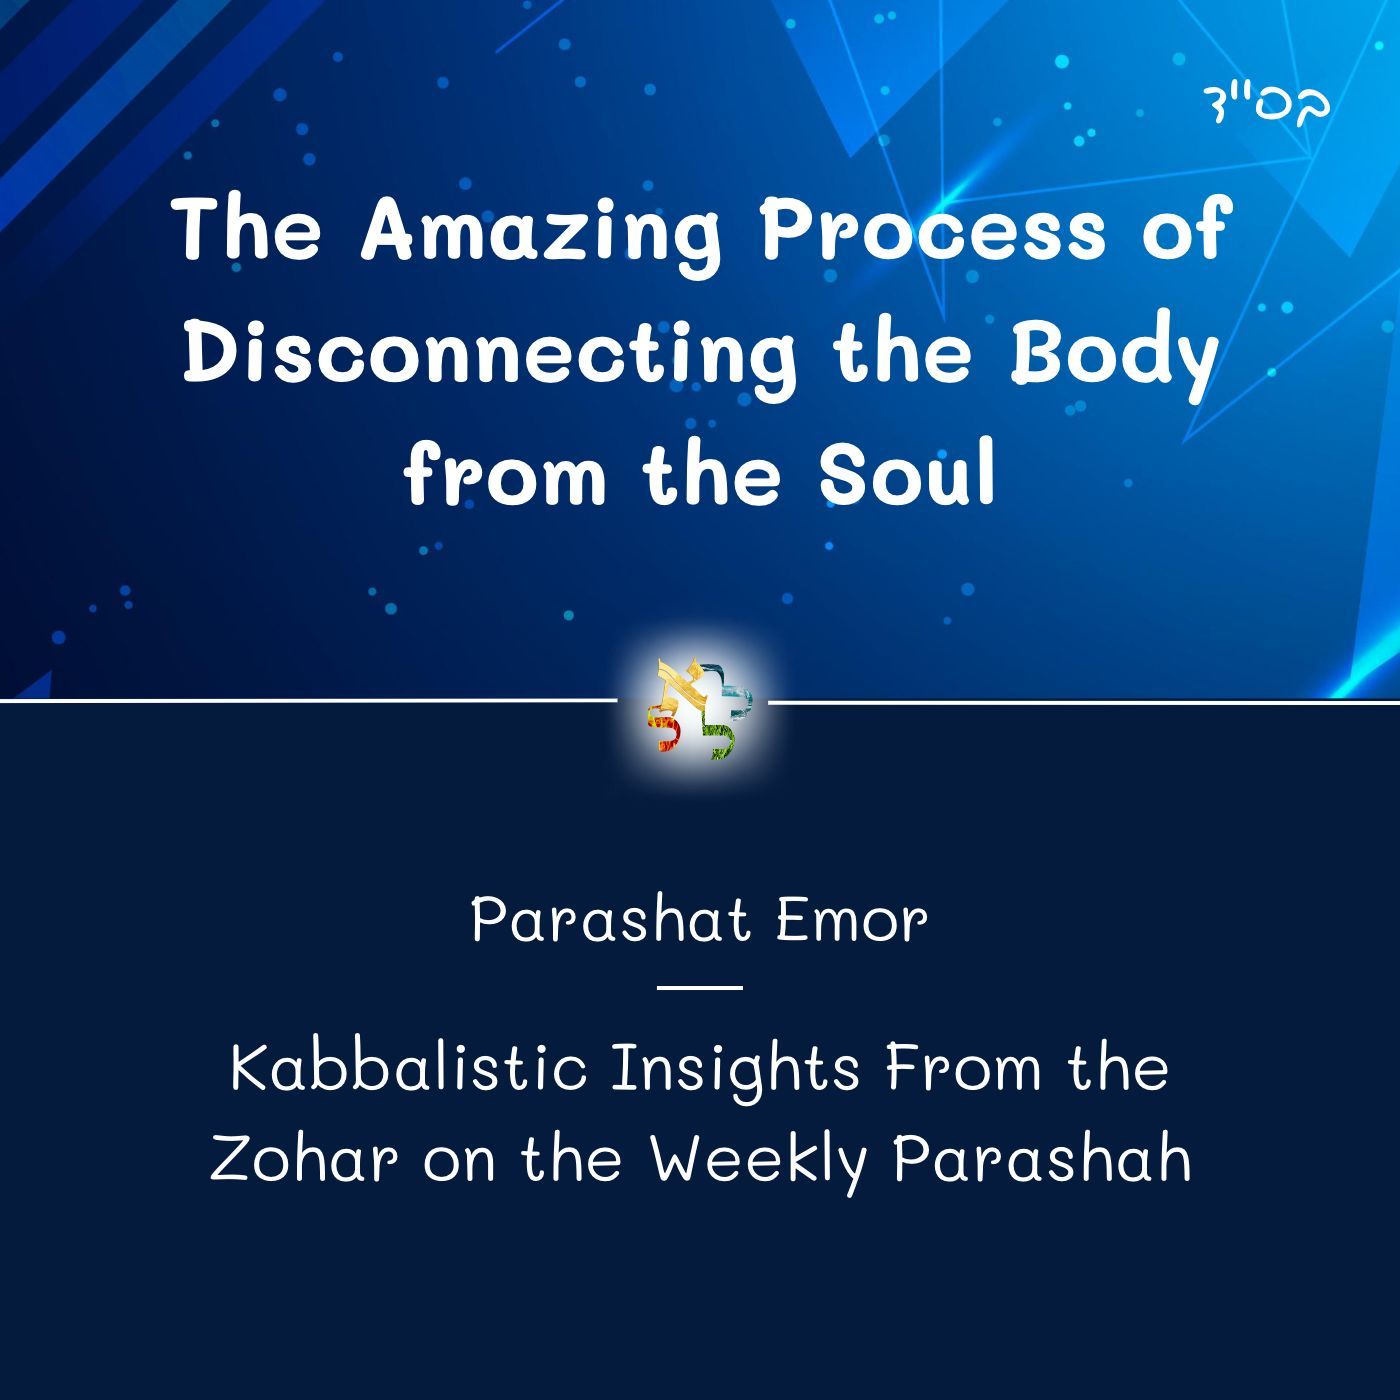 The Amazing Process of  Disconnecting the Body from the Soul - Kabbalistic Inspiration on the Parasha from the Zohar